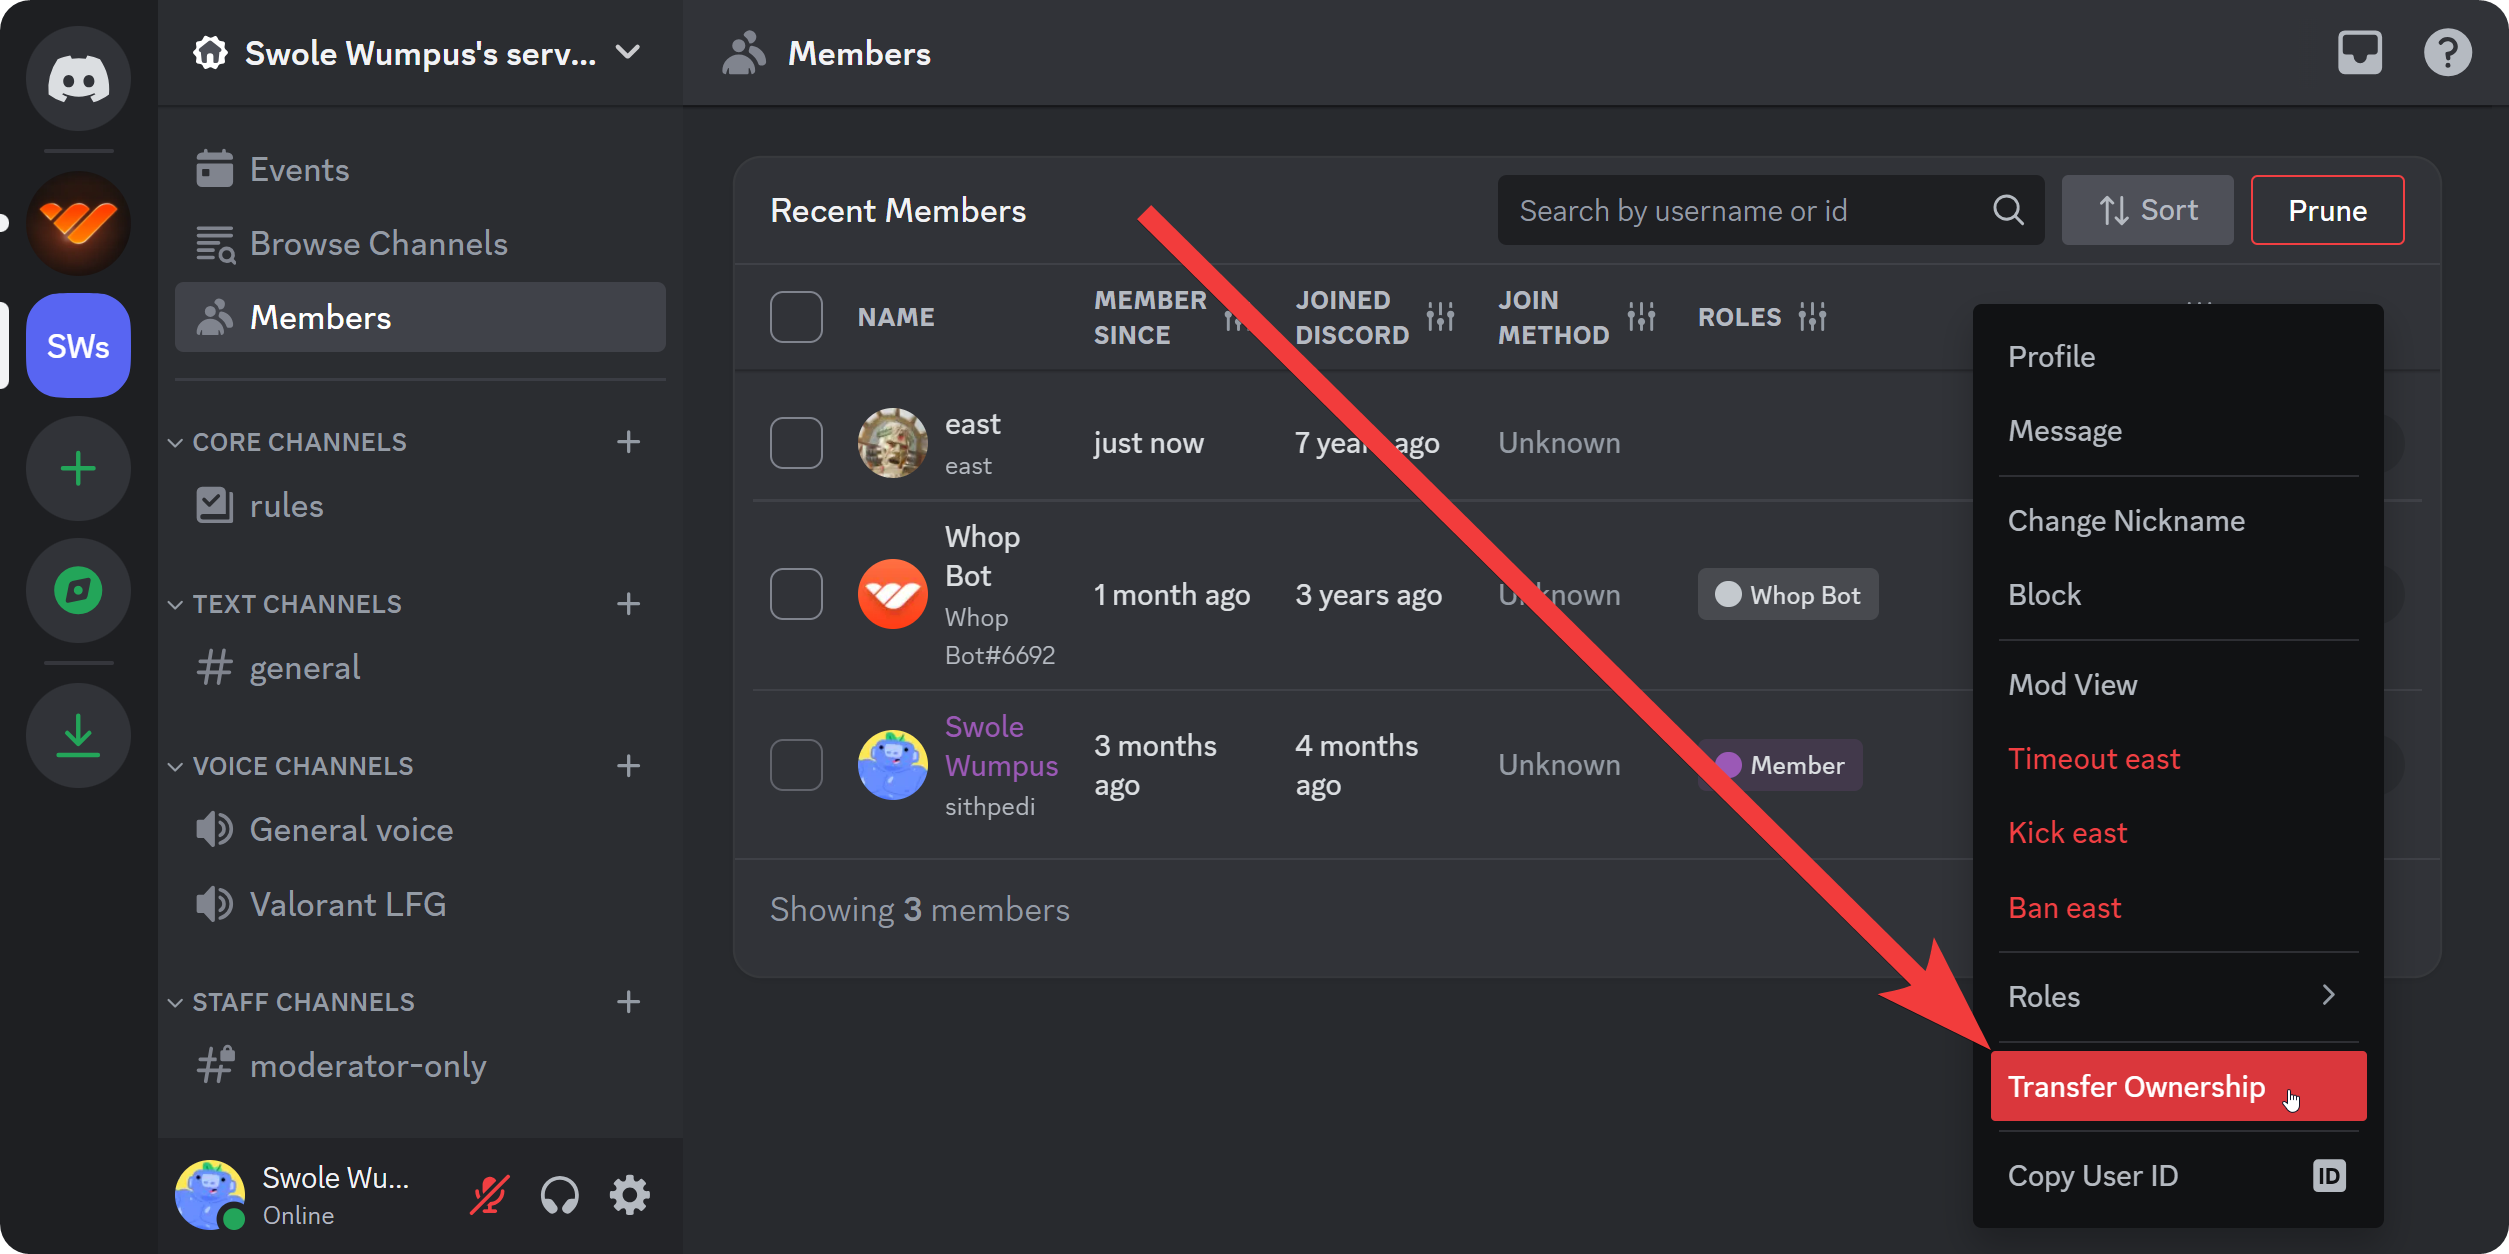 The Transfer Ownership button on the desktop version of Discord